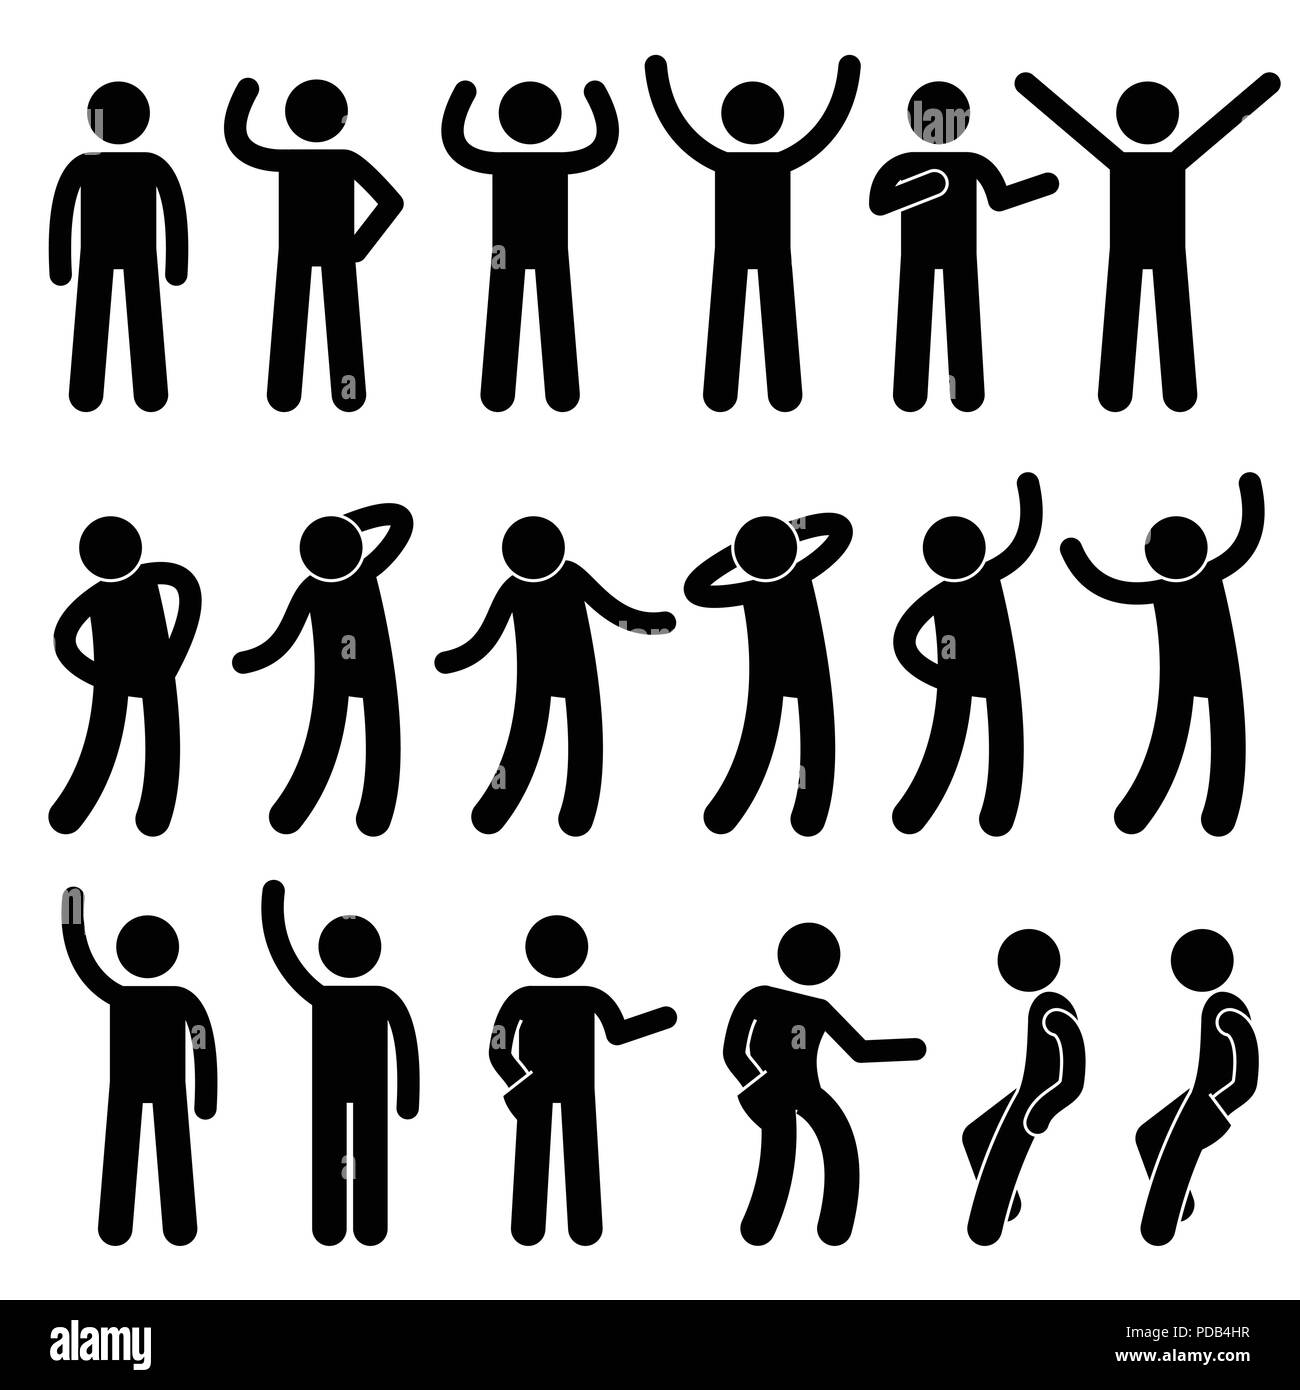 stick figure, set of icons people, basic movement, man poses, pictogram  human silhouettes Stock Vector